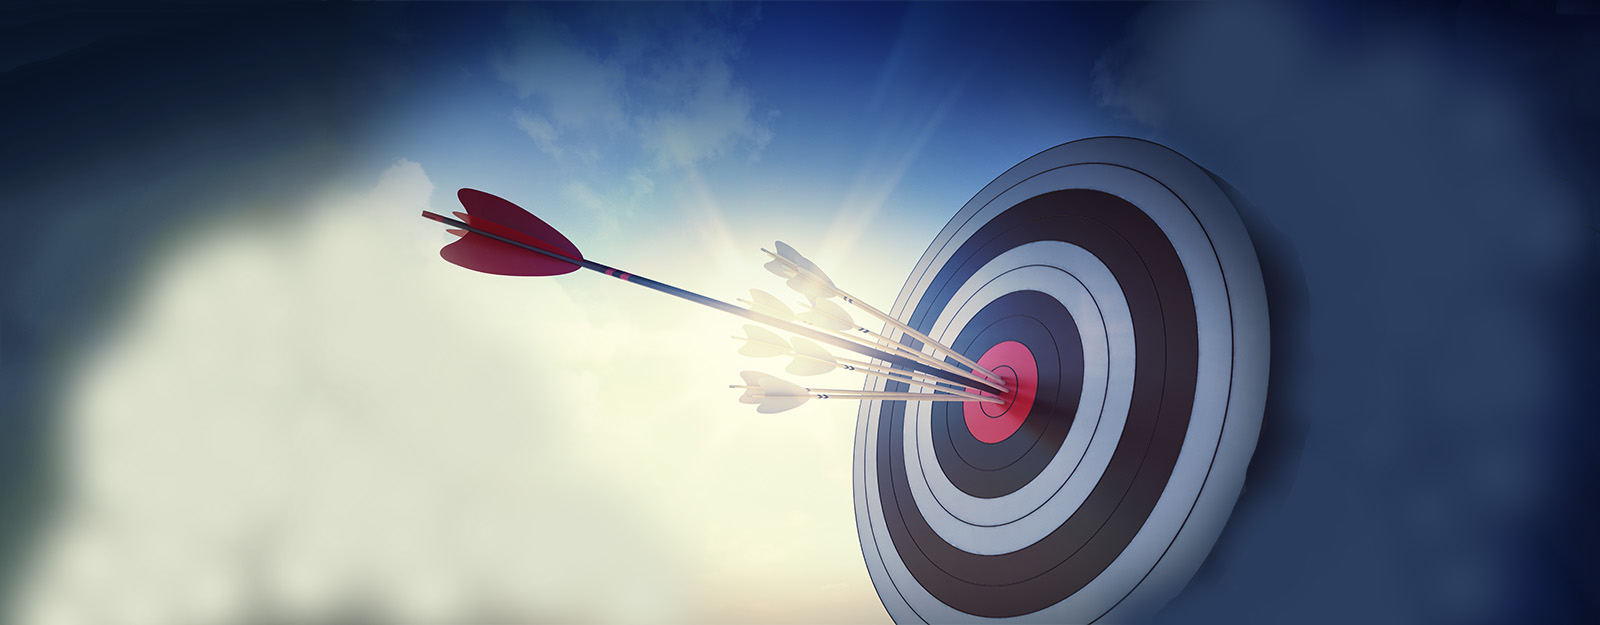 Image of a target with several small arrows and one large arrow hitting the bullseye. cloud background.